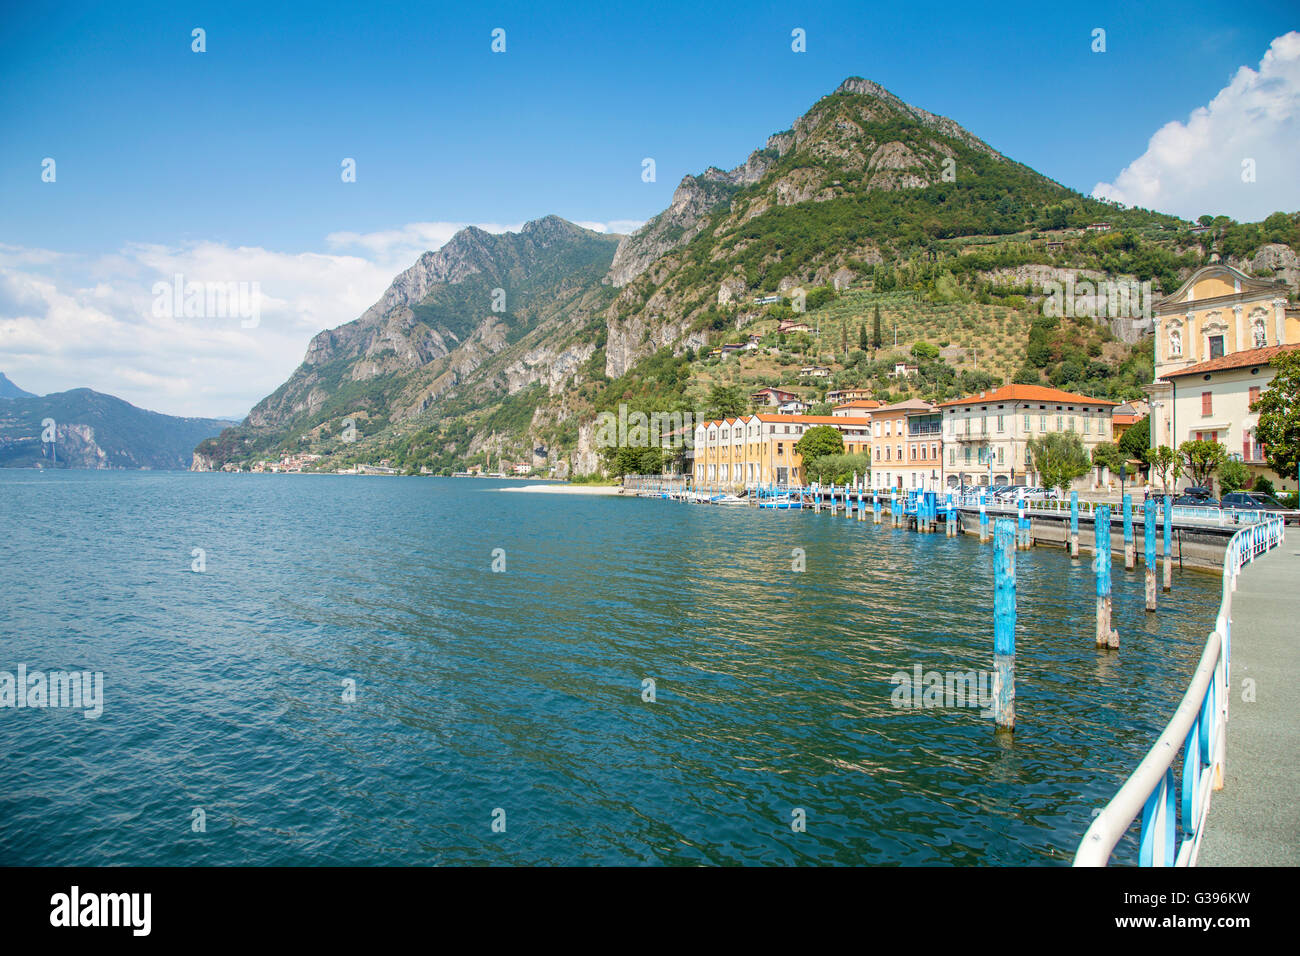 Scenic view of Lake Iseo, the fourth largest lake in Lombardy Italy. There are several medieval towns around the lake filled wit Stock Photo